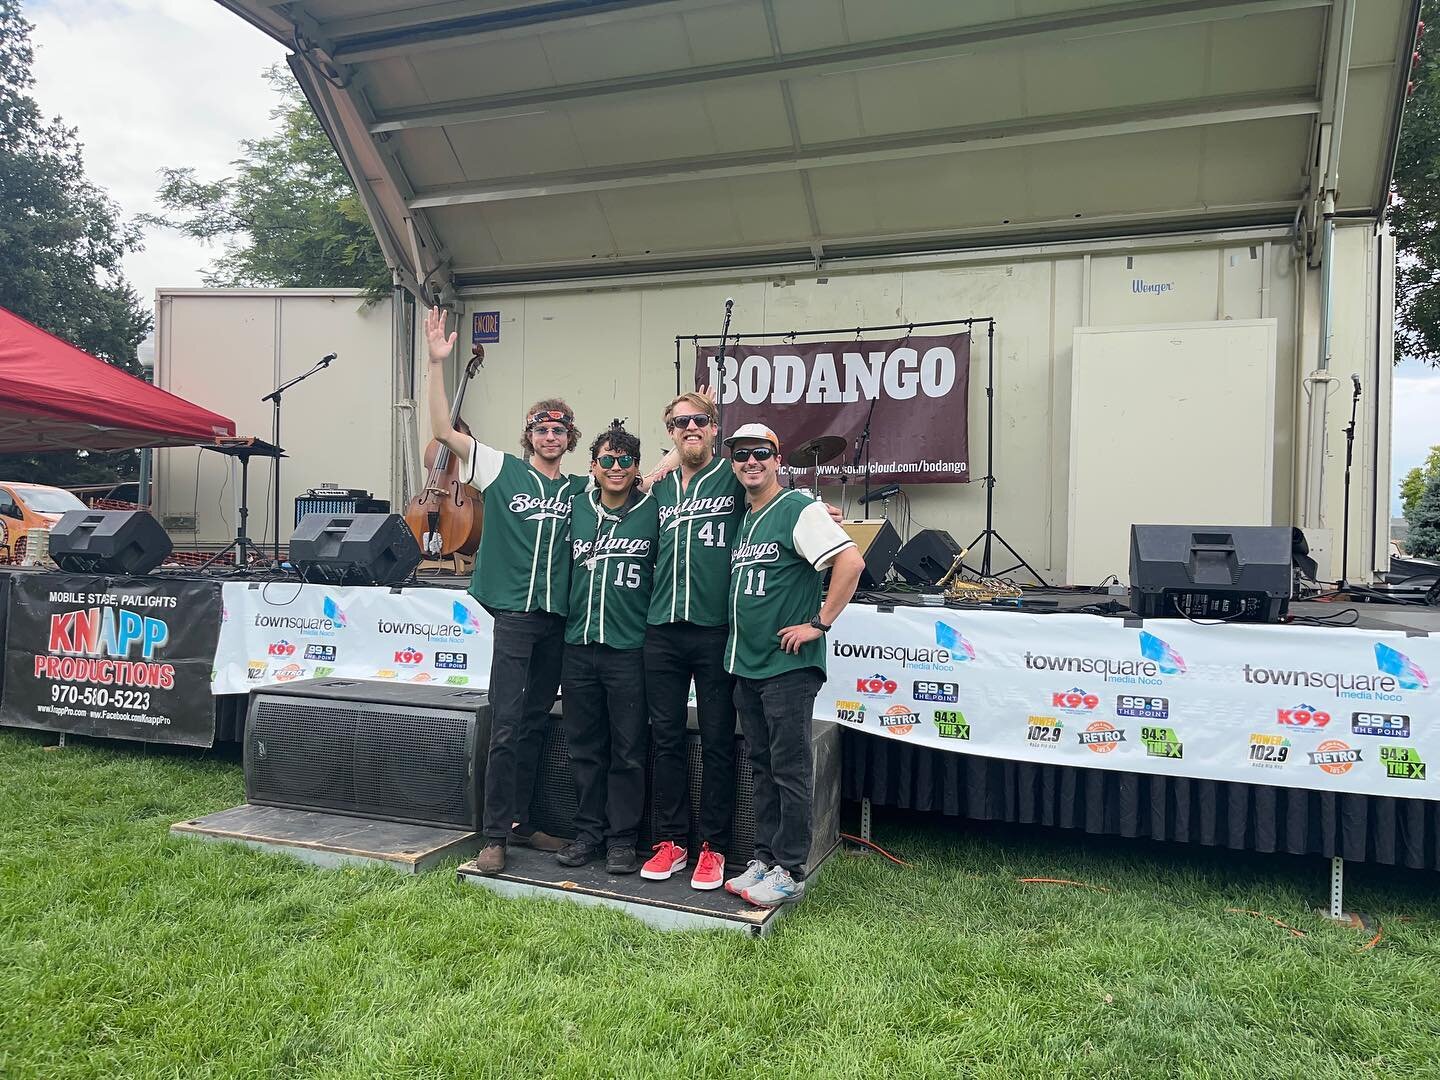 Bodango is up in Greeley for the Northern Colorado Beer Fest!!
🎶 🎶🎶🎶🎶🎶🎶🎶🎶🎶🎶

Come join us for songs and suds 🍻 

#denvermusicscene #denvermusic